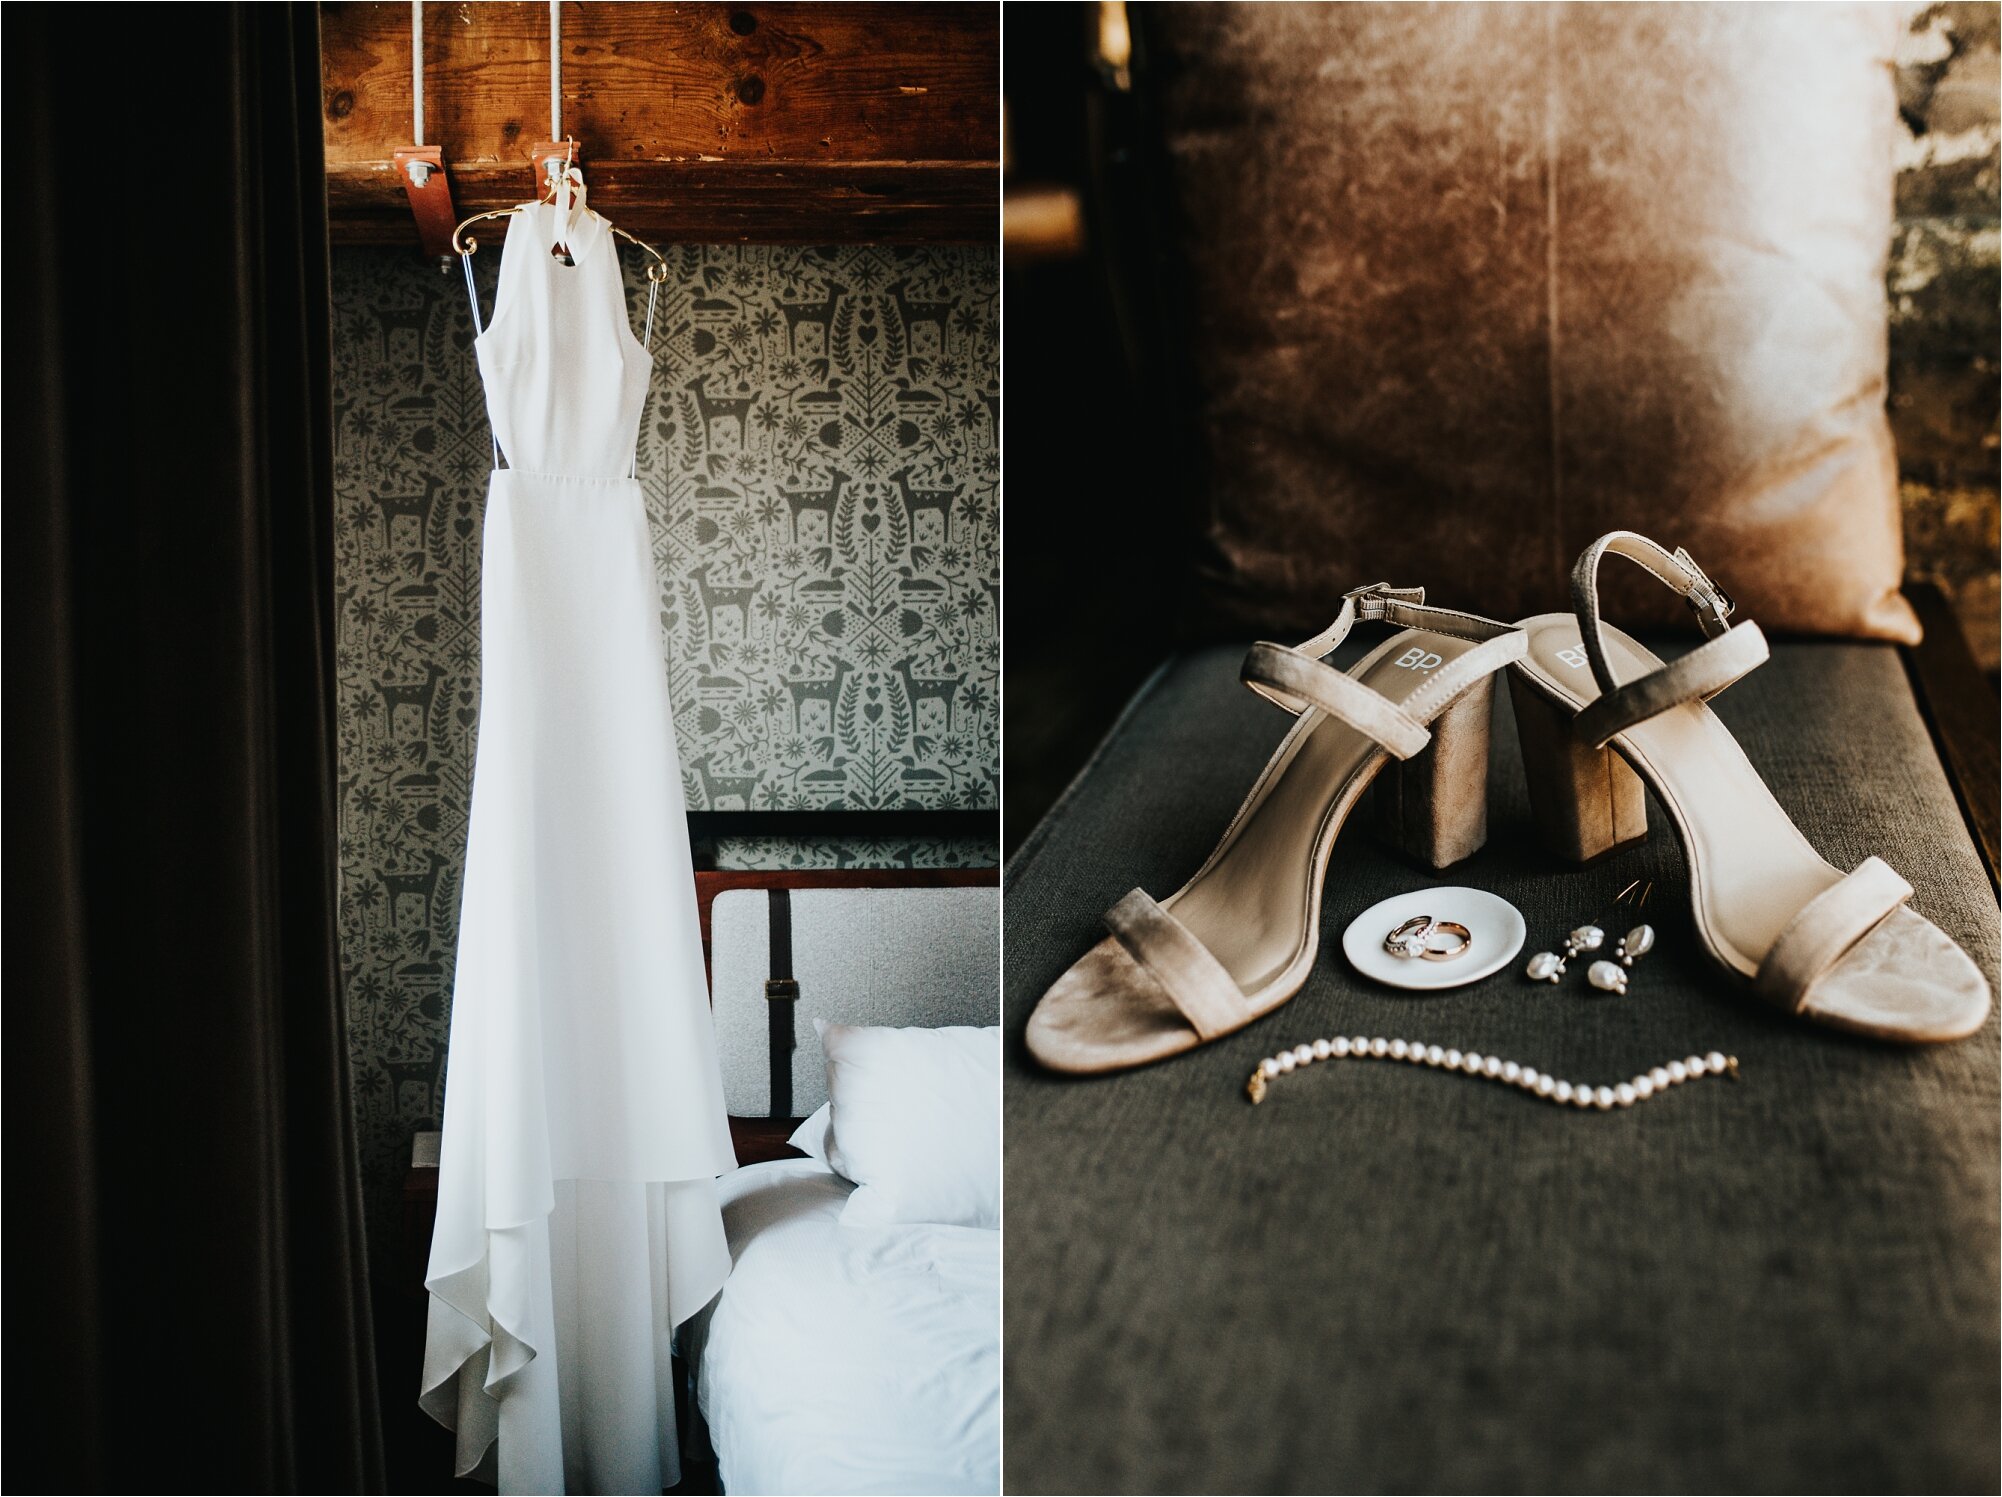  wedding details shoes dress earrings necklace jewelry photography 